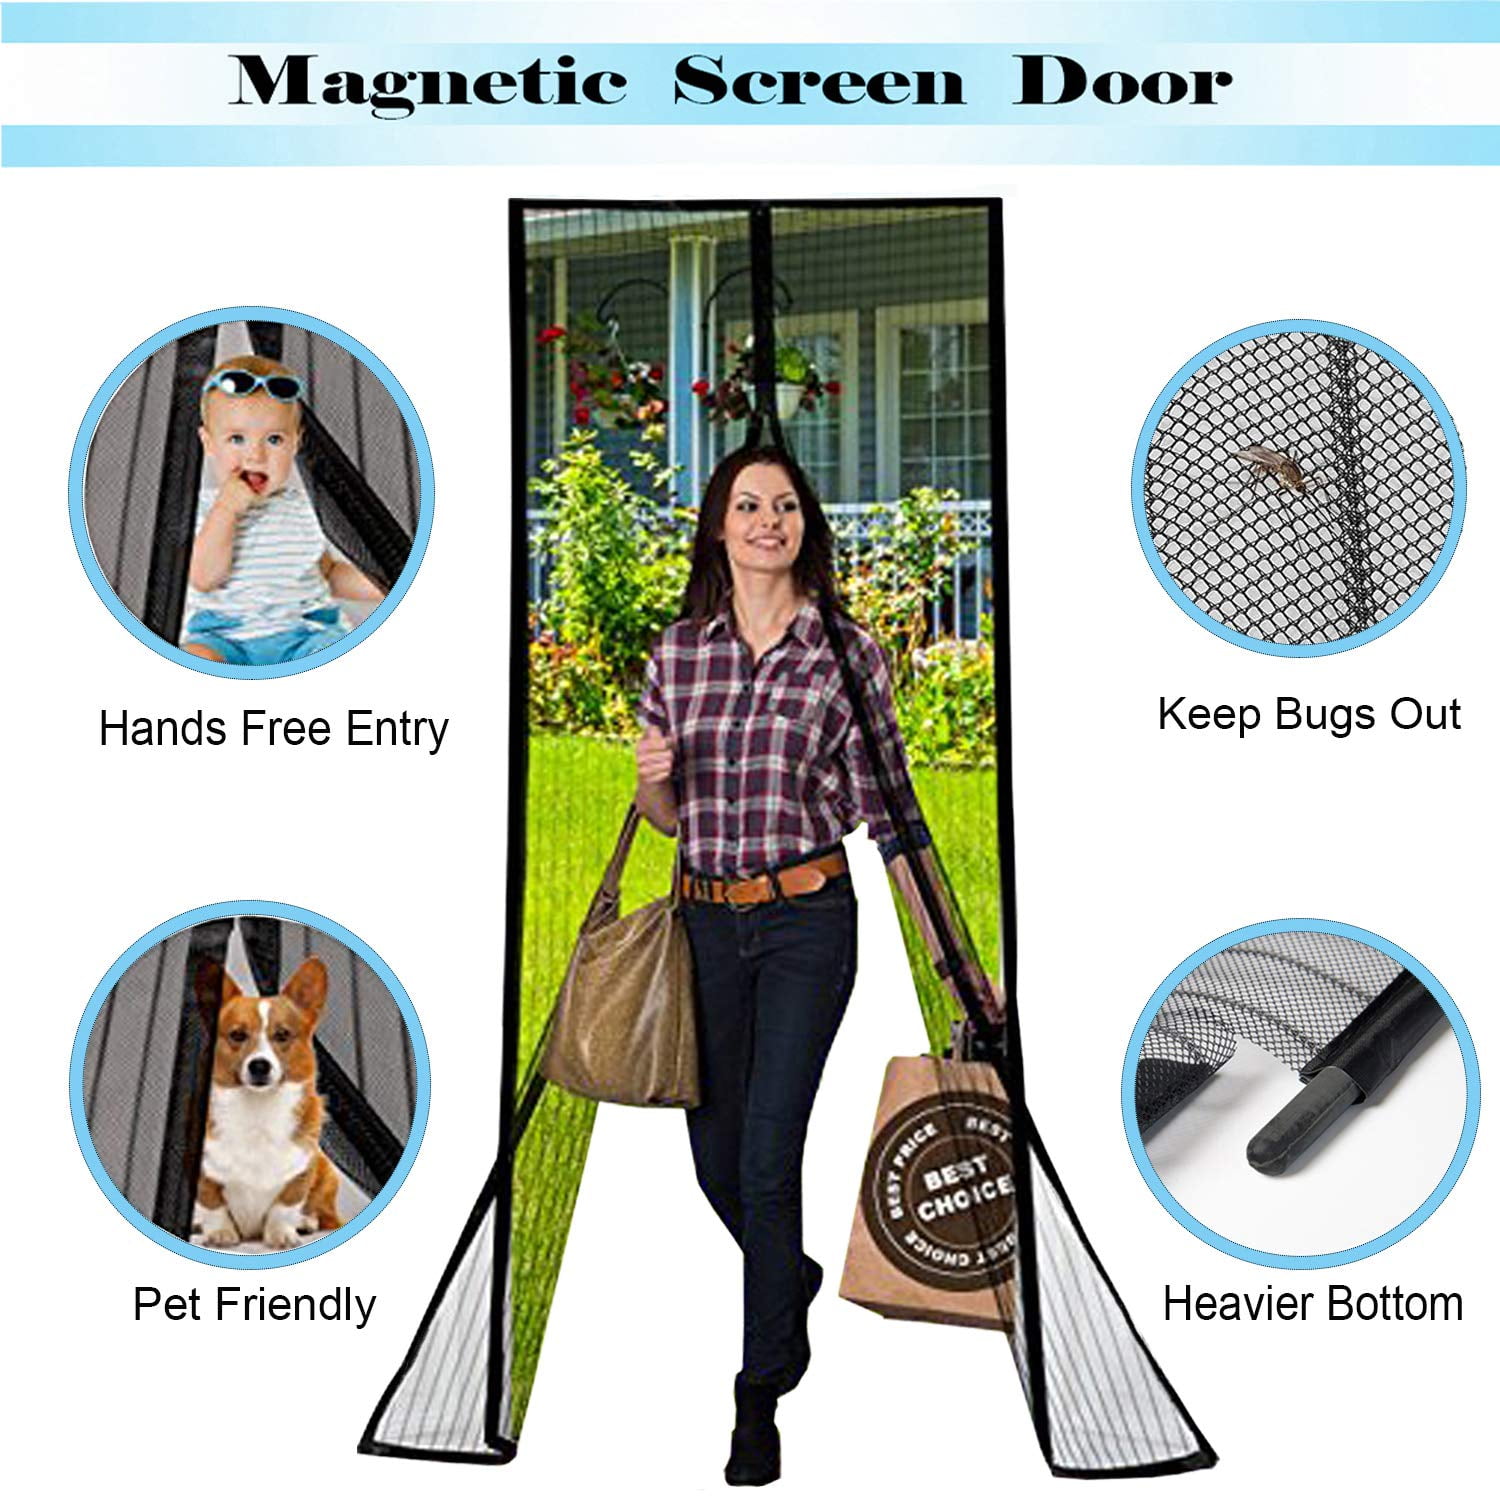 90x210CM Top-to-Bottom Seal No Mosquitos Fits Door Up to 34 x 82 Magnetic Screen Door Magnetic Fly Insect Screen Door Mosquito Net Automatically Shut Hands Free Keep Bugs Out Let Fresh Air in